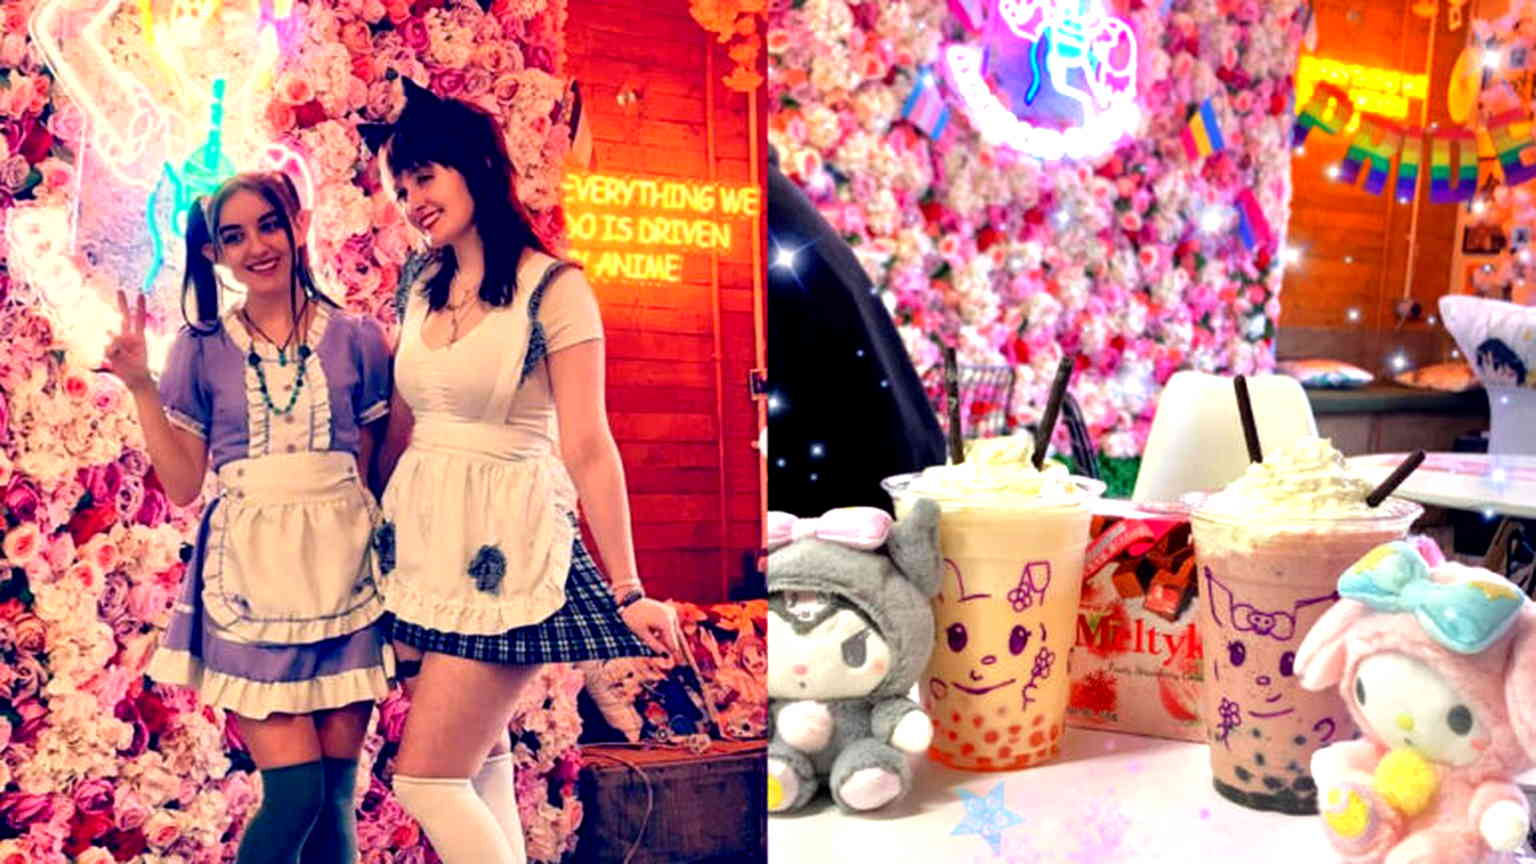 UK maid café where customers are called ‘master’ hiring more servers as business thrives